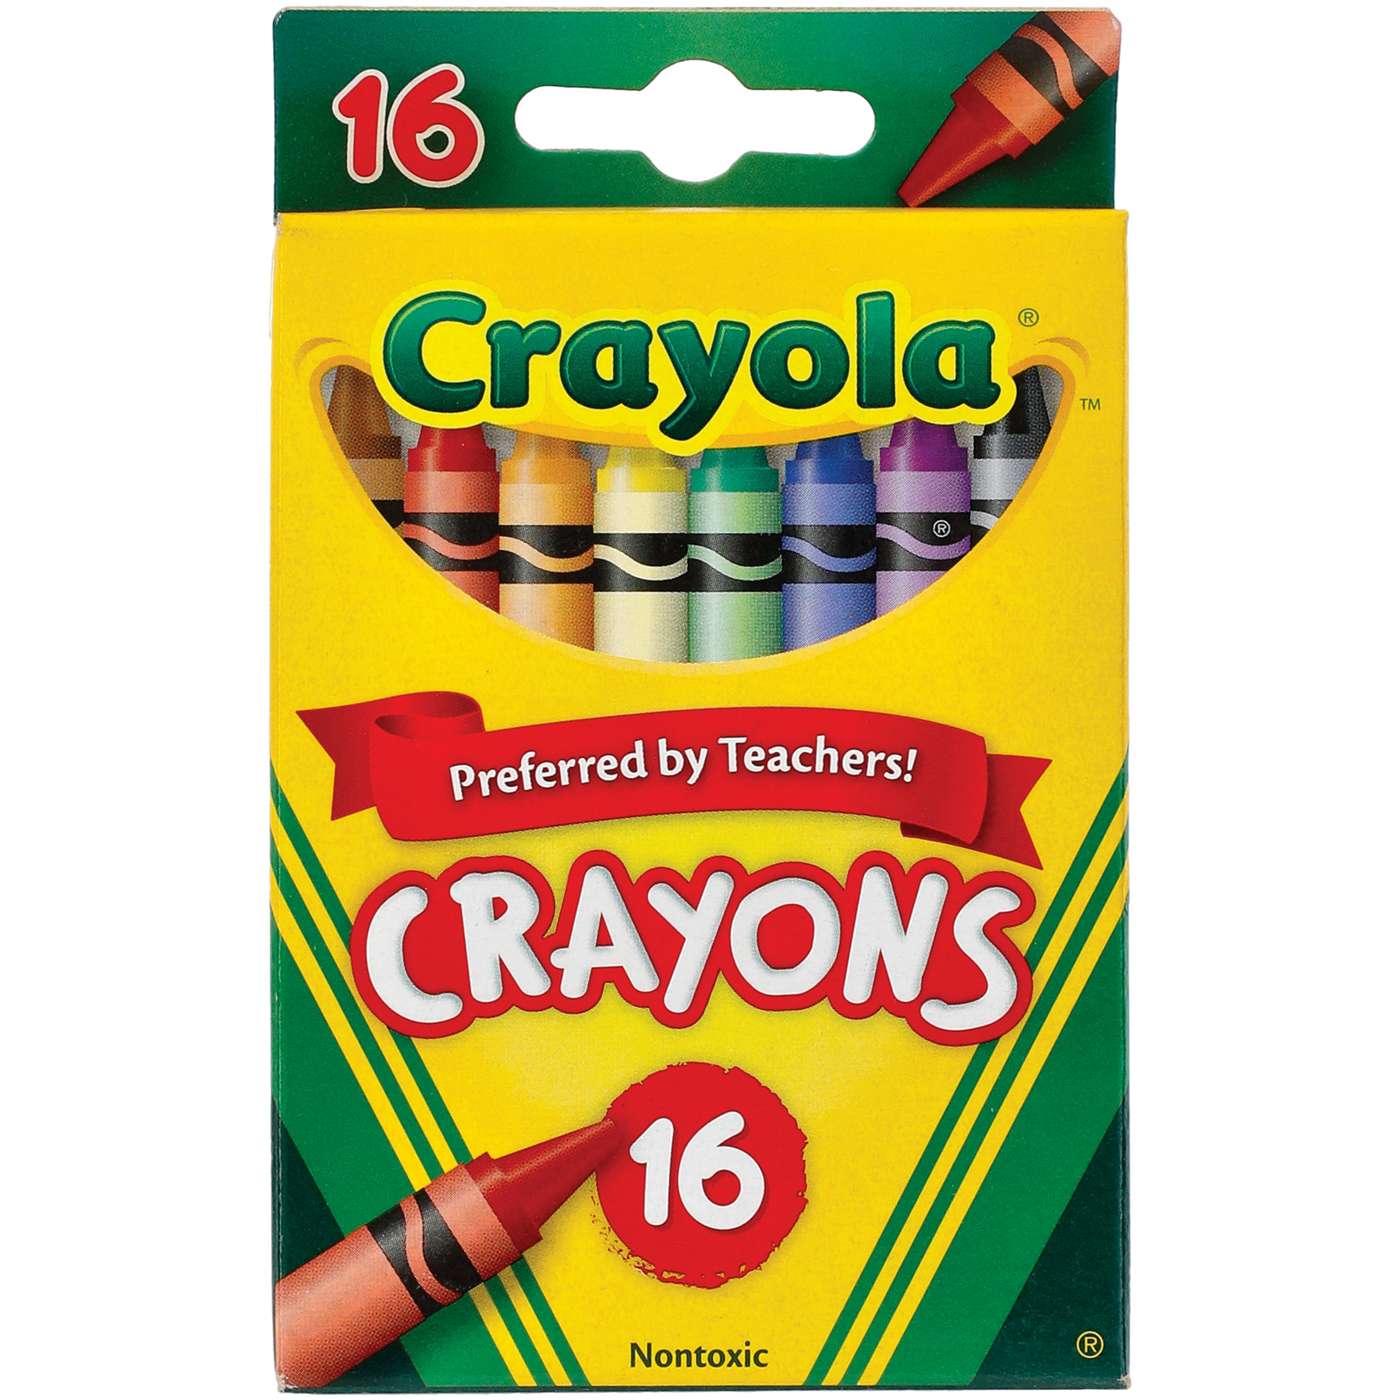 Crayola Washable Dry Erase Travel Pack - Shop Books & Coloring at H-E-B